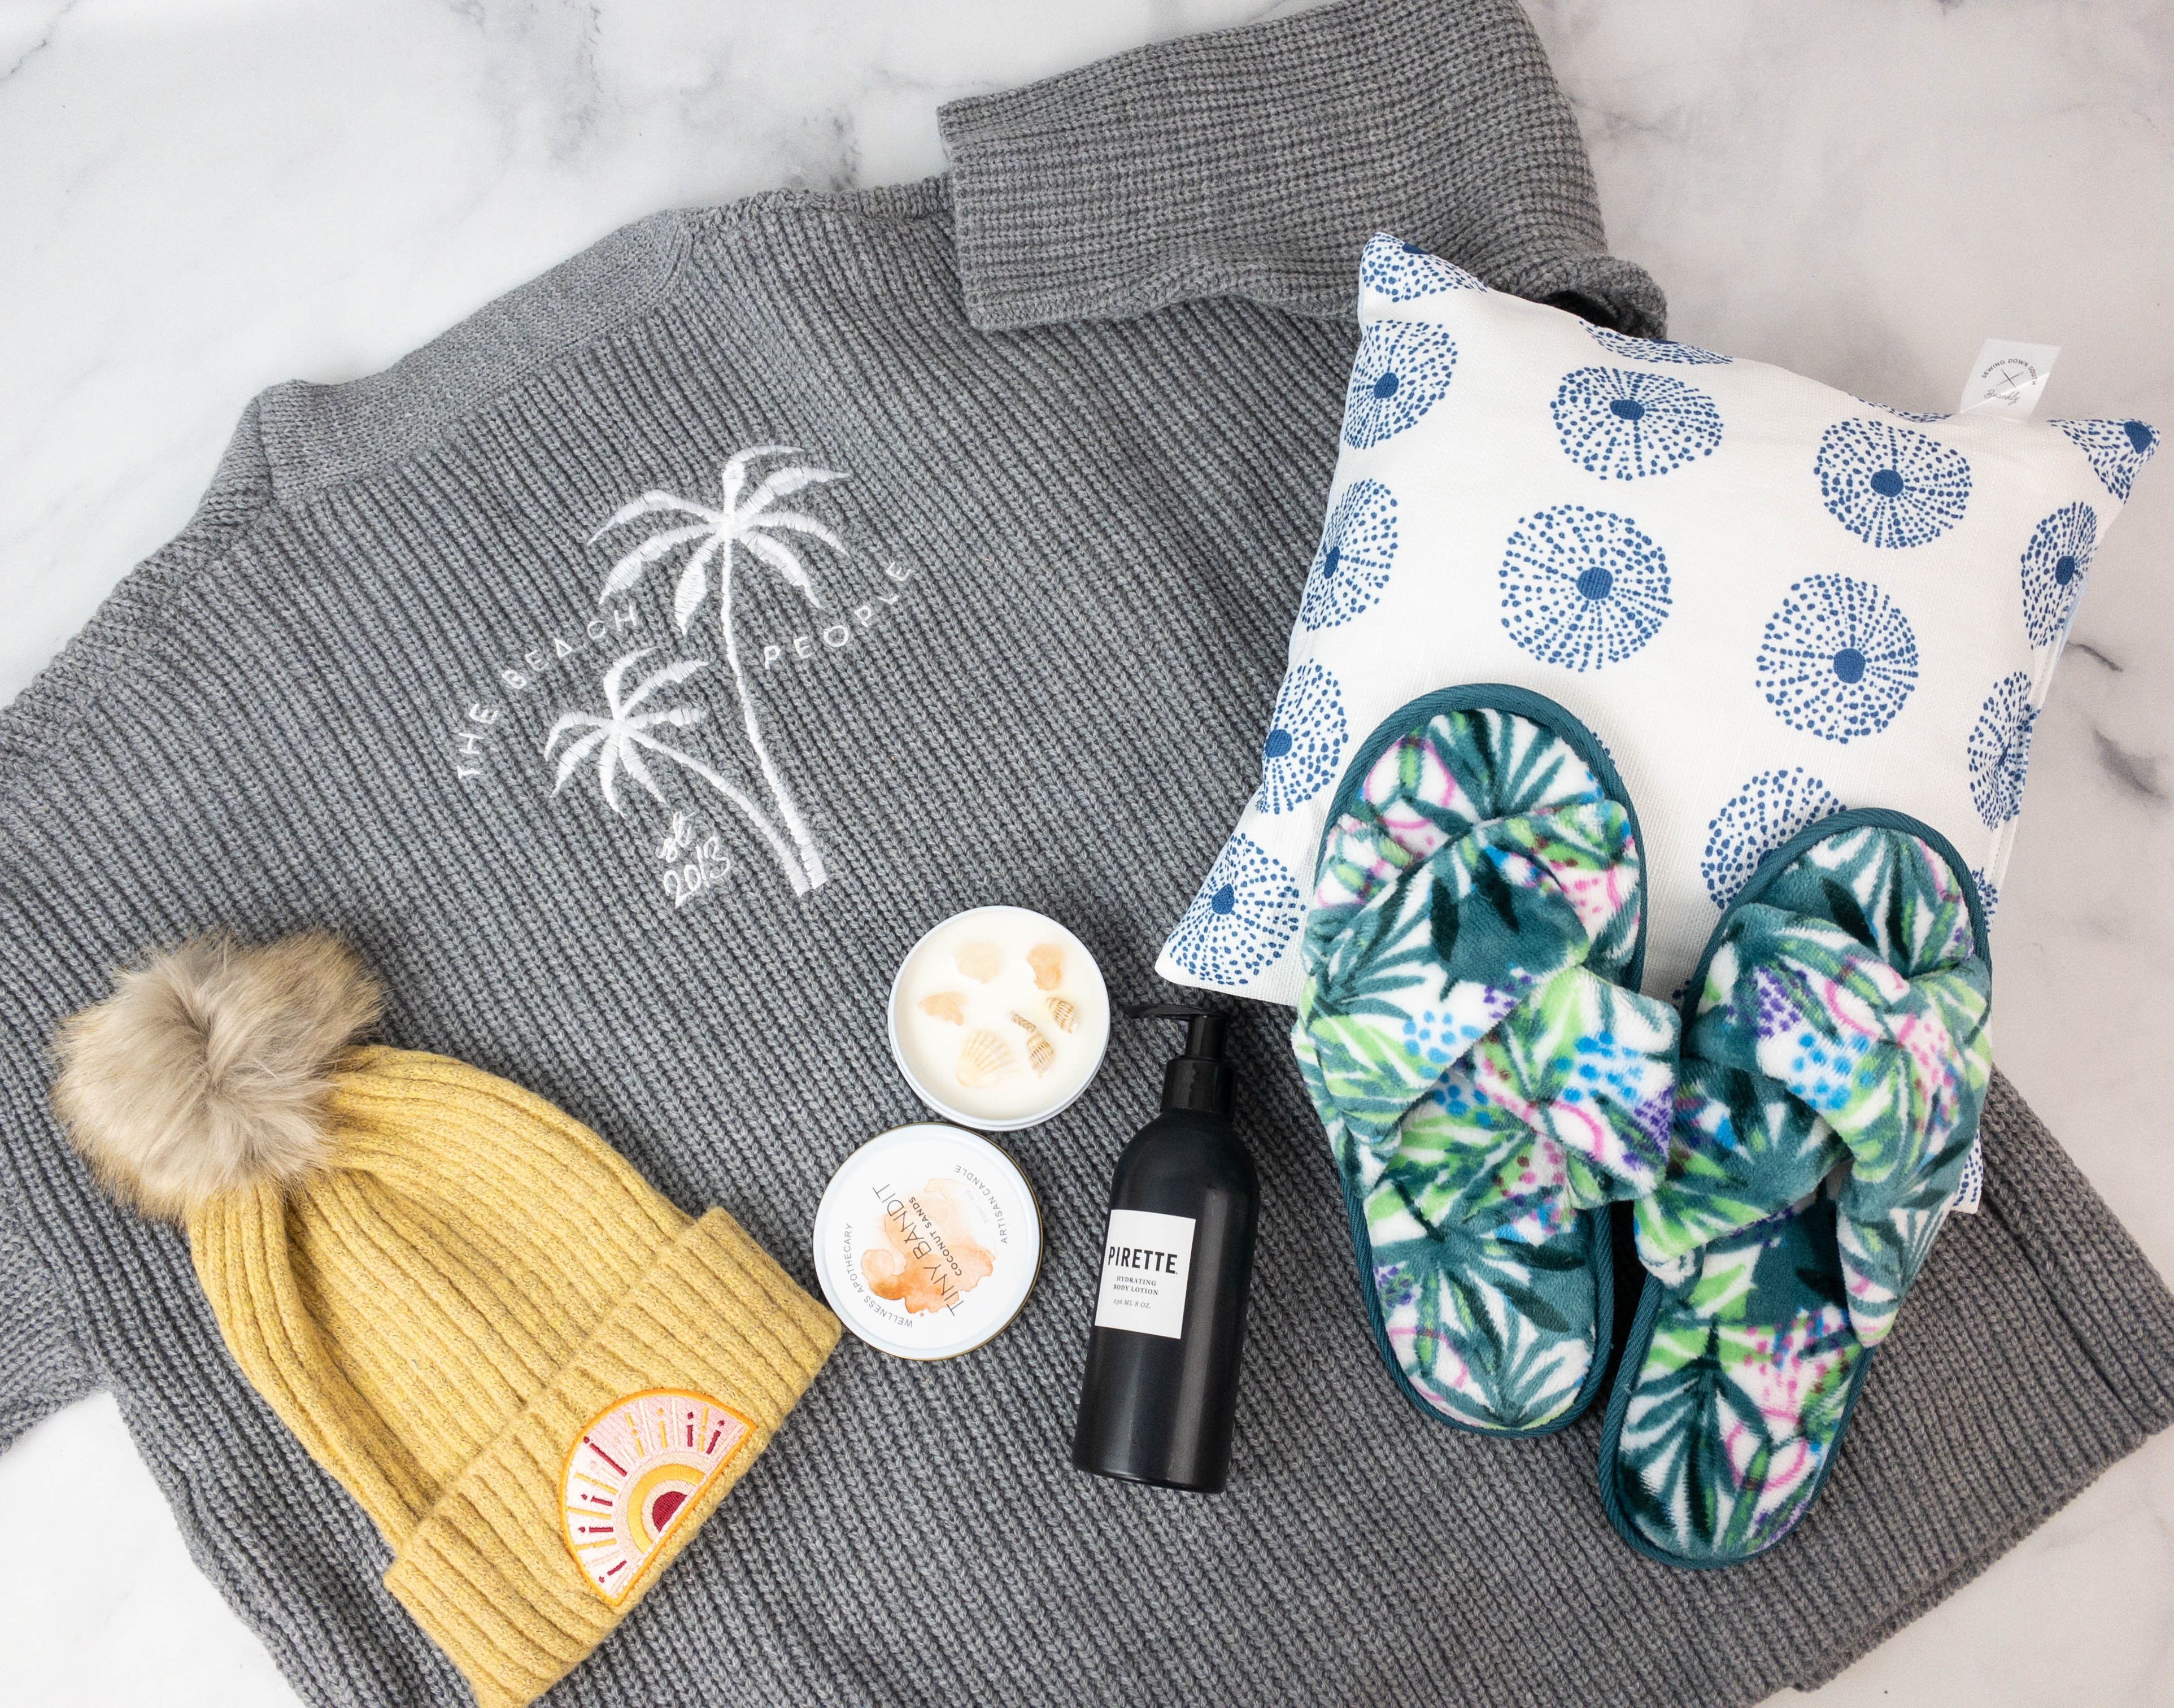 Beachly Winter 2021 Women's Box Review! Hello Subscription